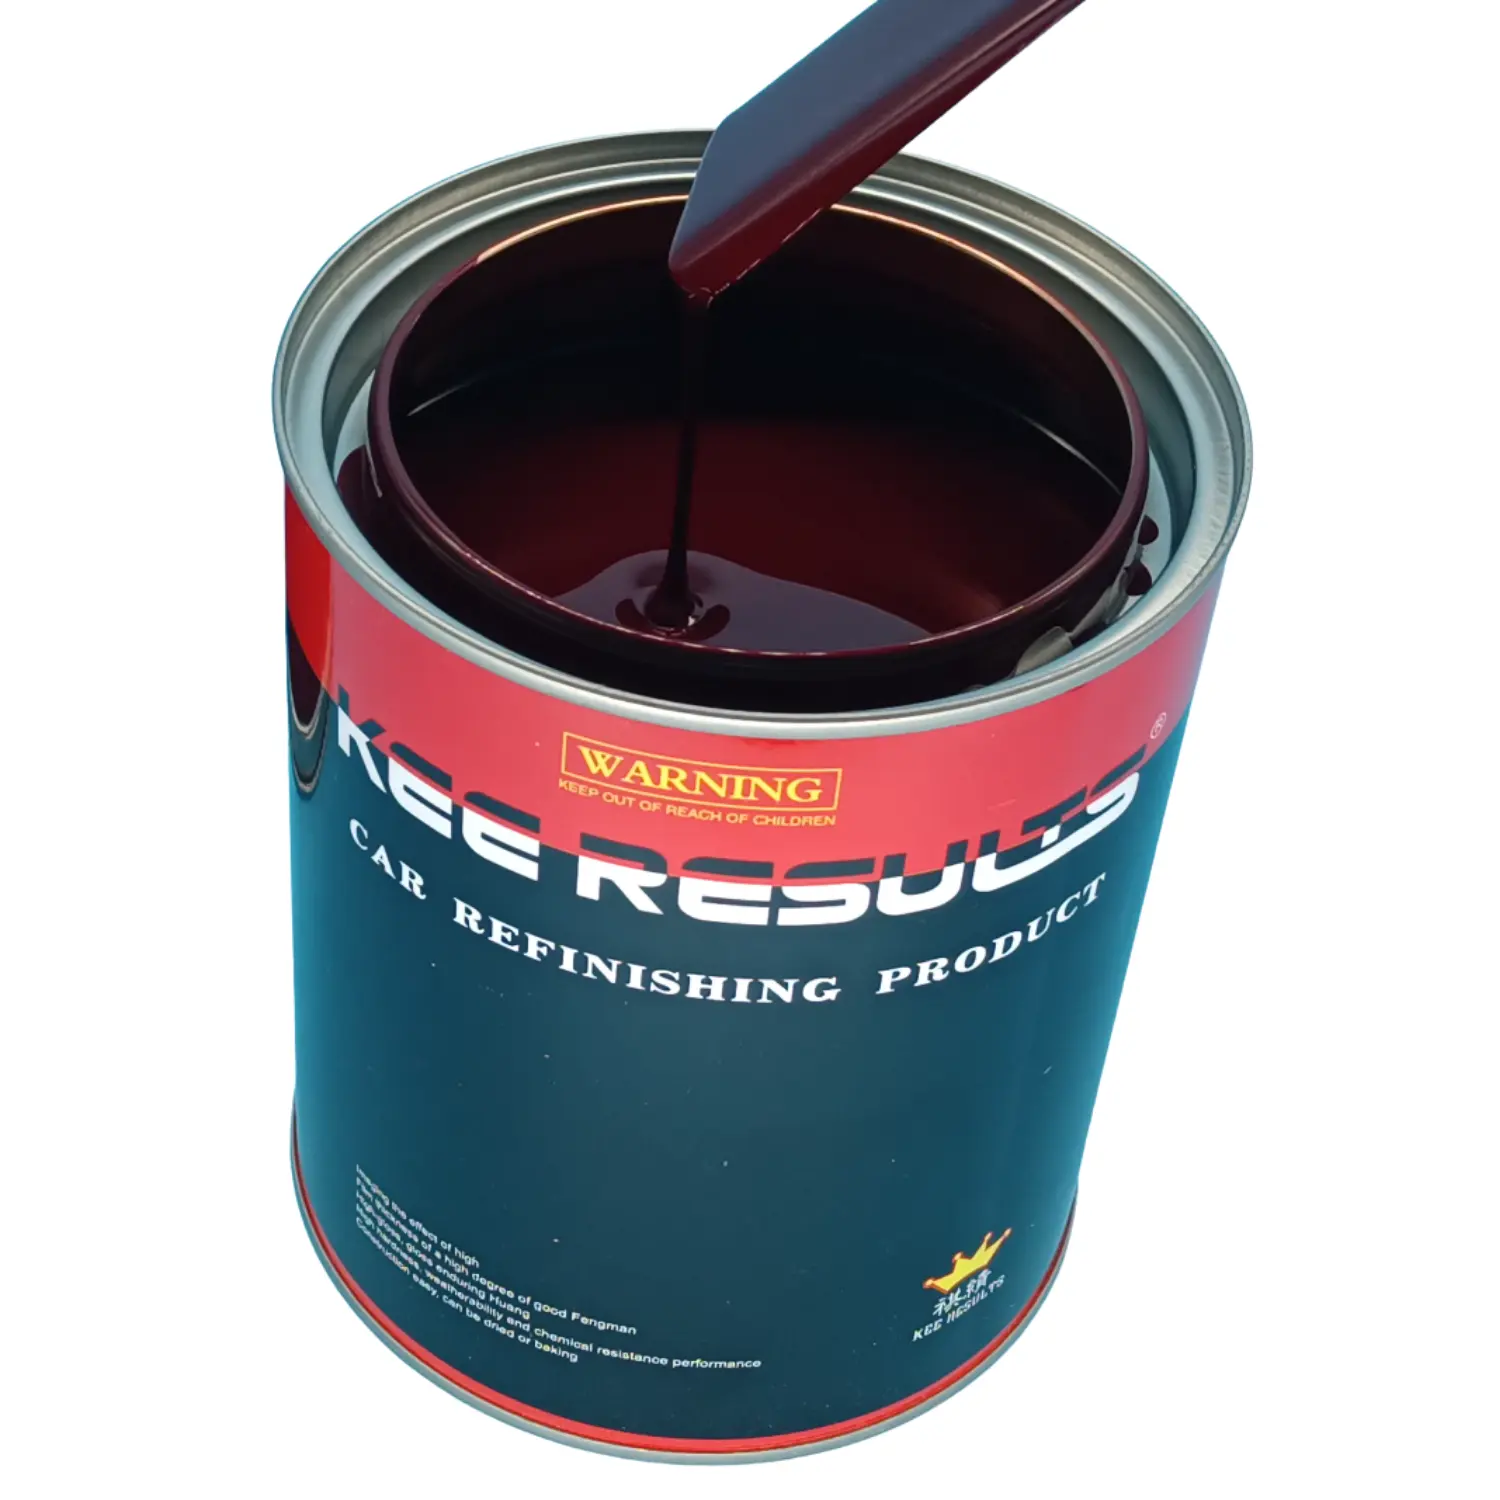 Hot new retail products auto car paints and refinishes best selling products in europe